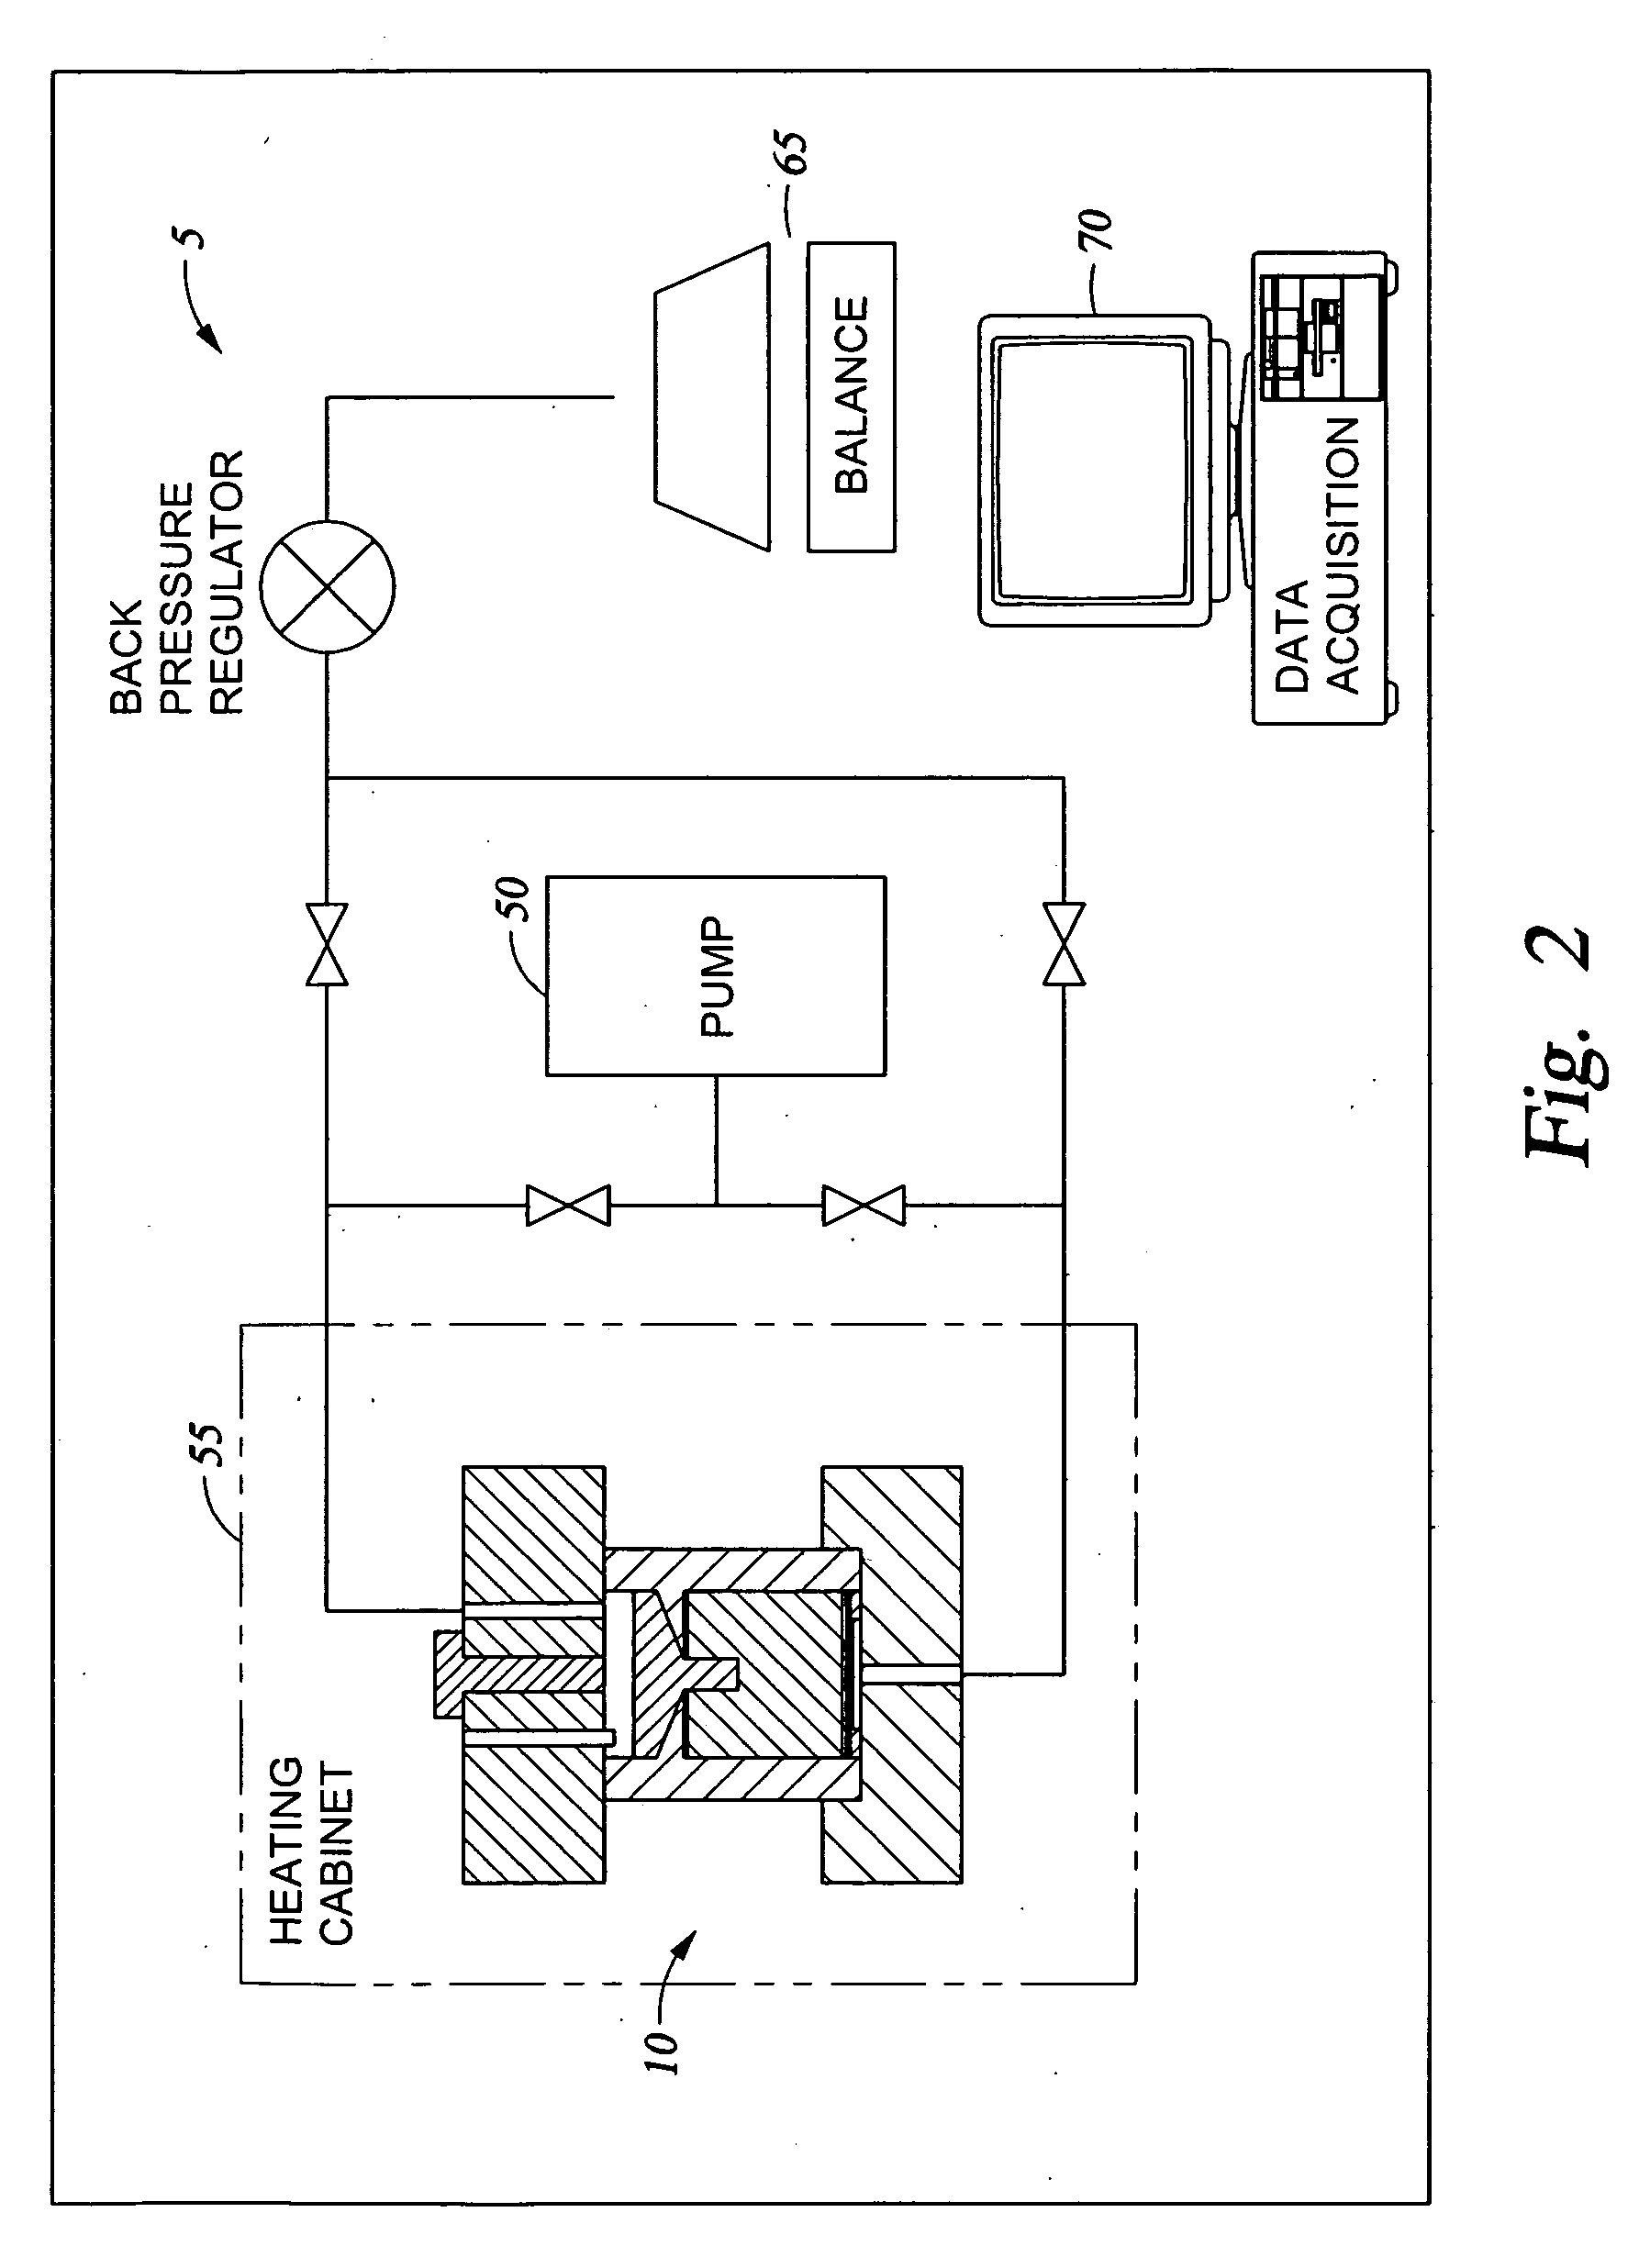 Sealant composition comprising a gel system and a reduced amount of cement for a permeable zone downhole